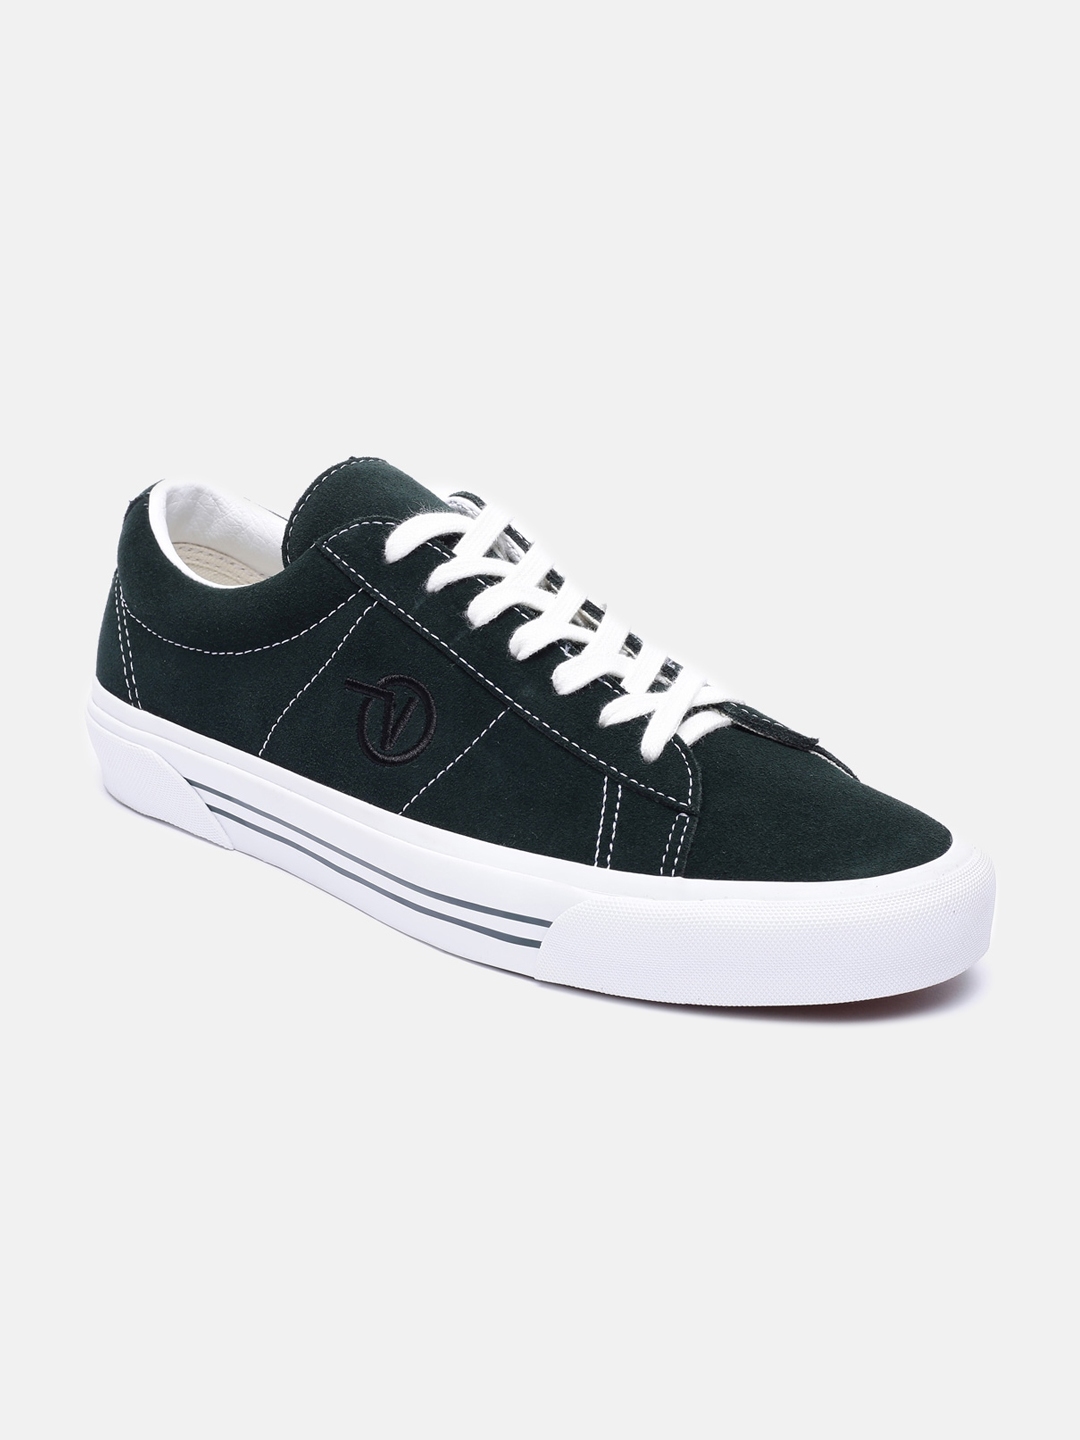 Buy Vans Unisex Black & White Sneakers - Casual Shoes for Unisex